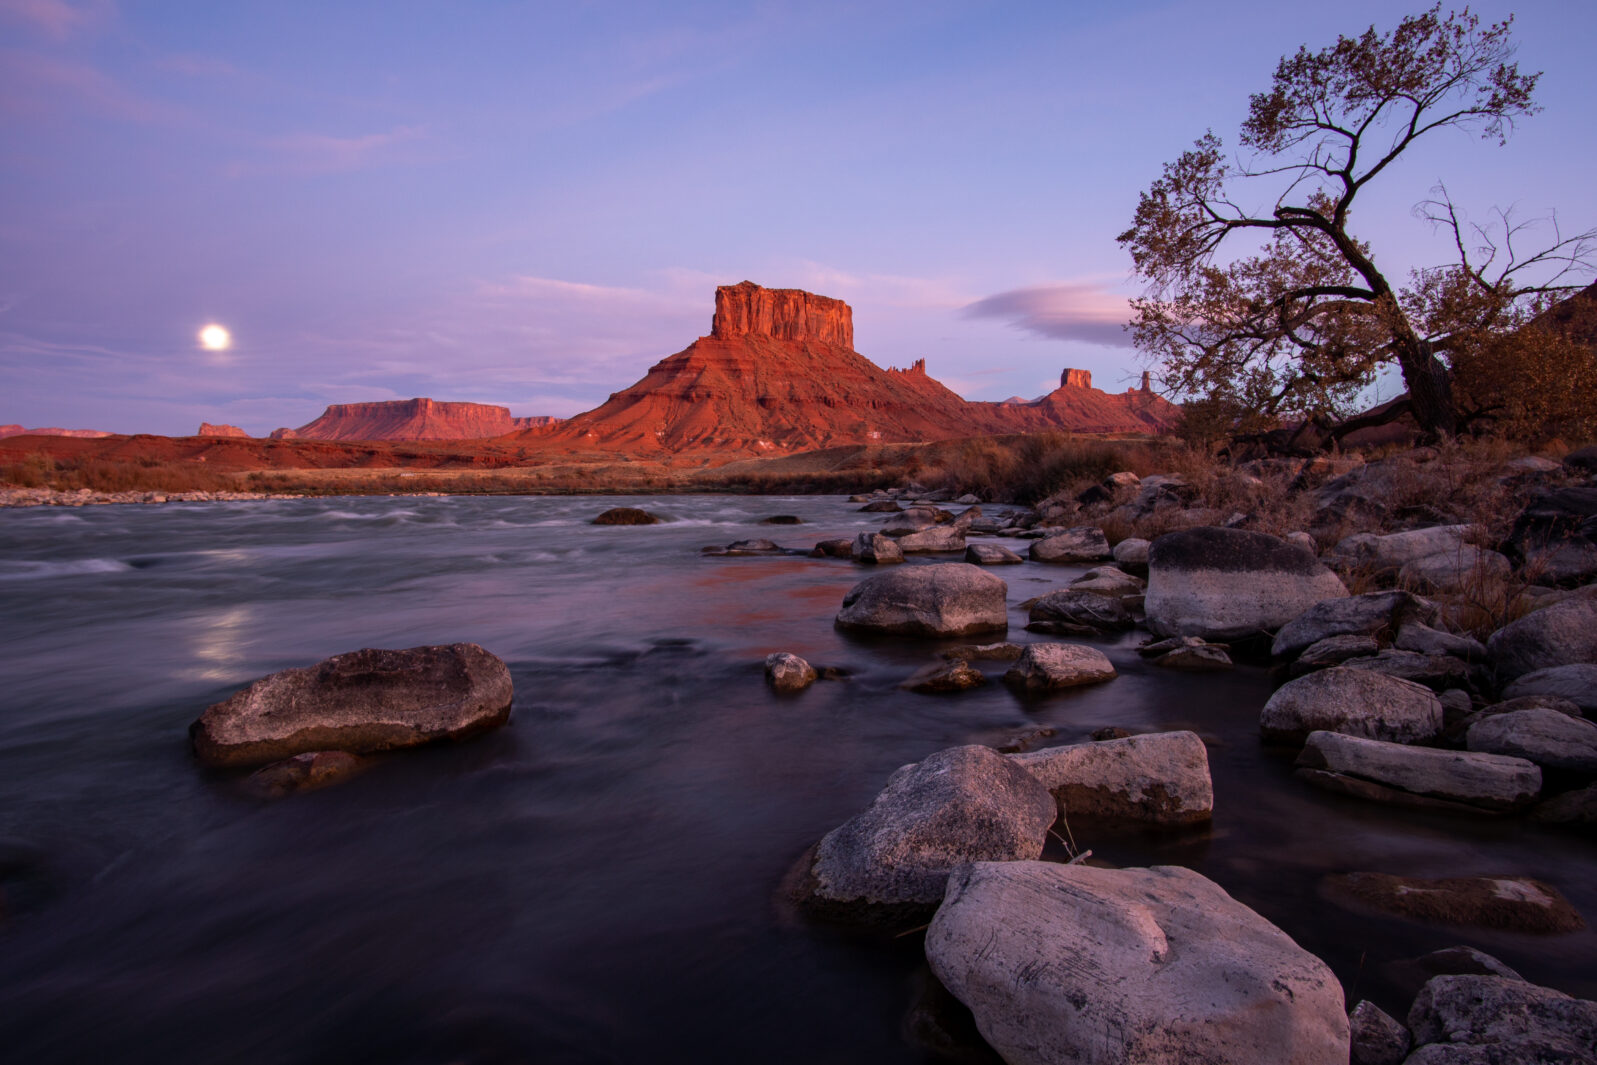 Colorado river with desert landscape glowing in Utah near moab with moon